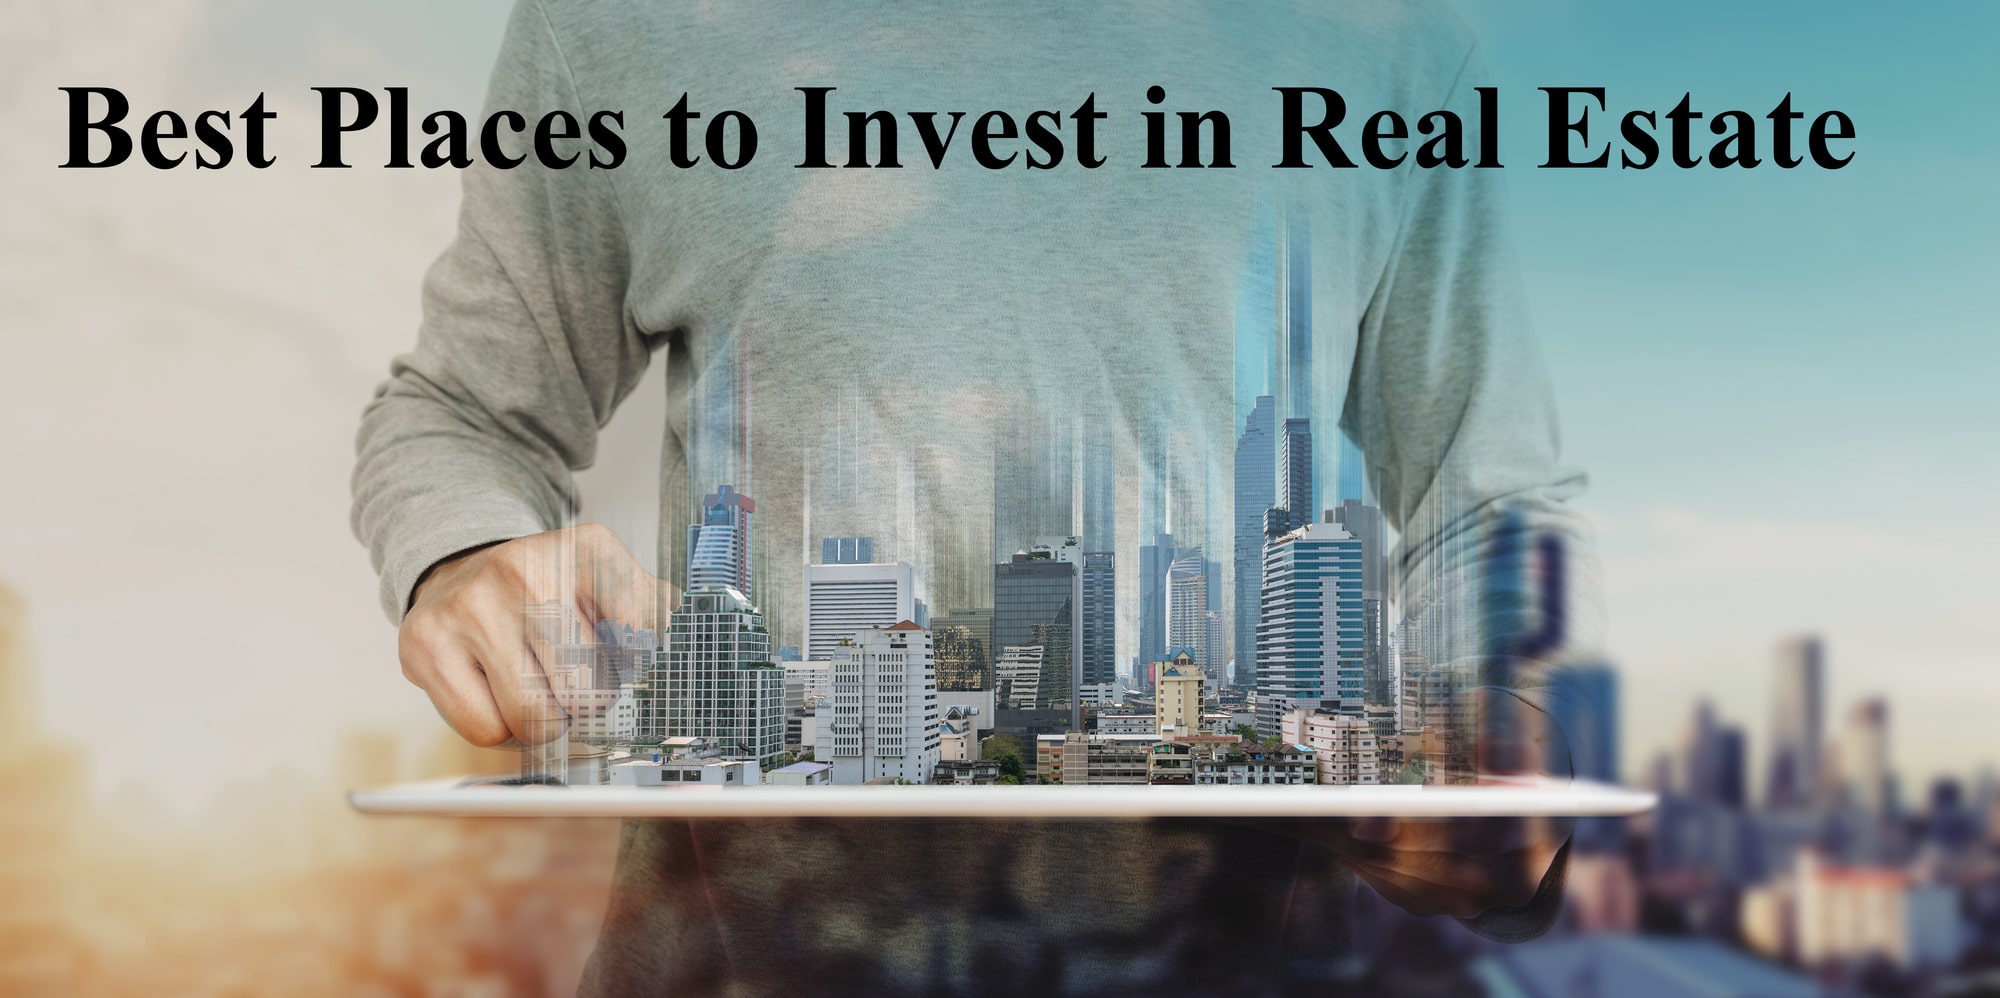 Best Places To Invest in Real Estate in 2022